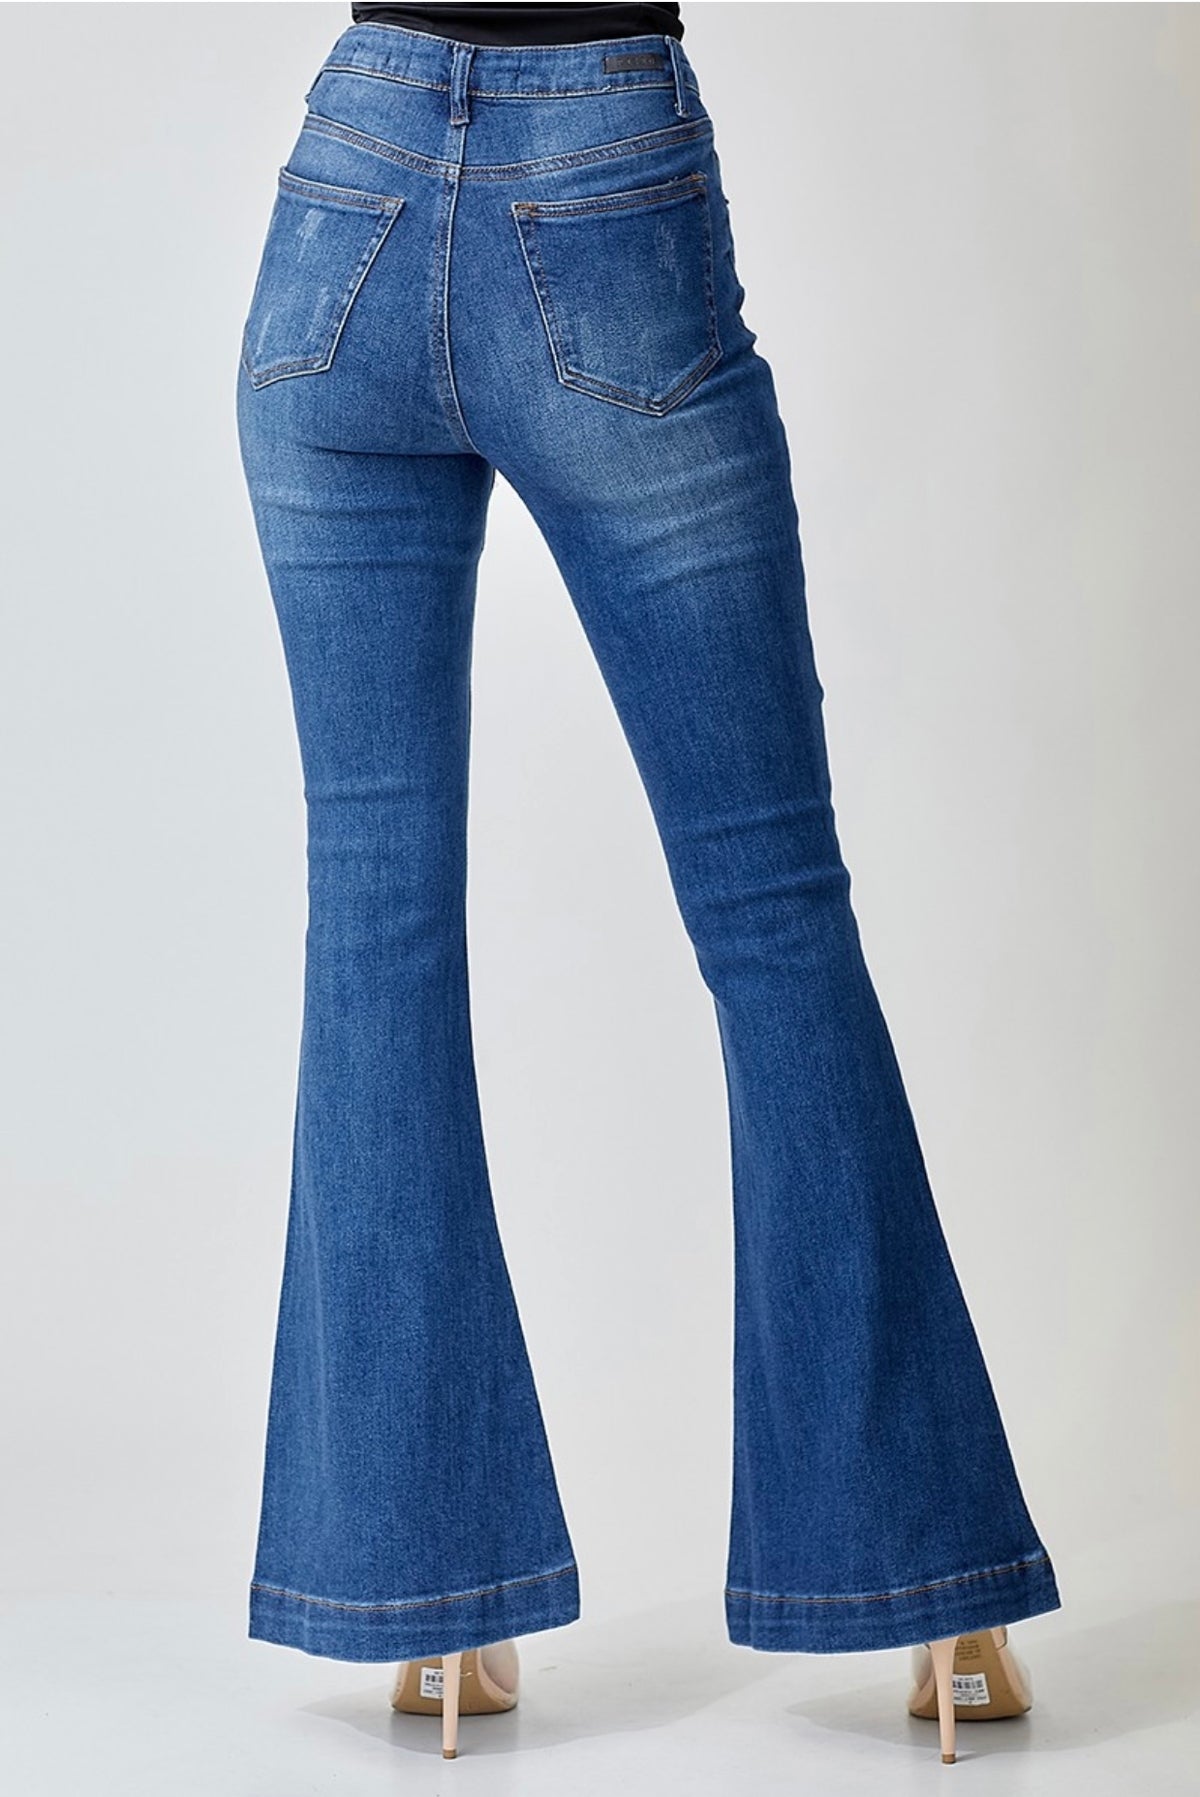 Winona High Rise Button Fly Jeans